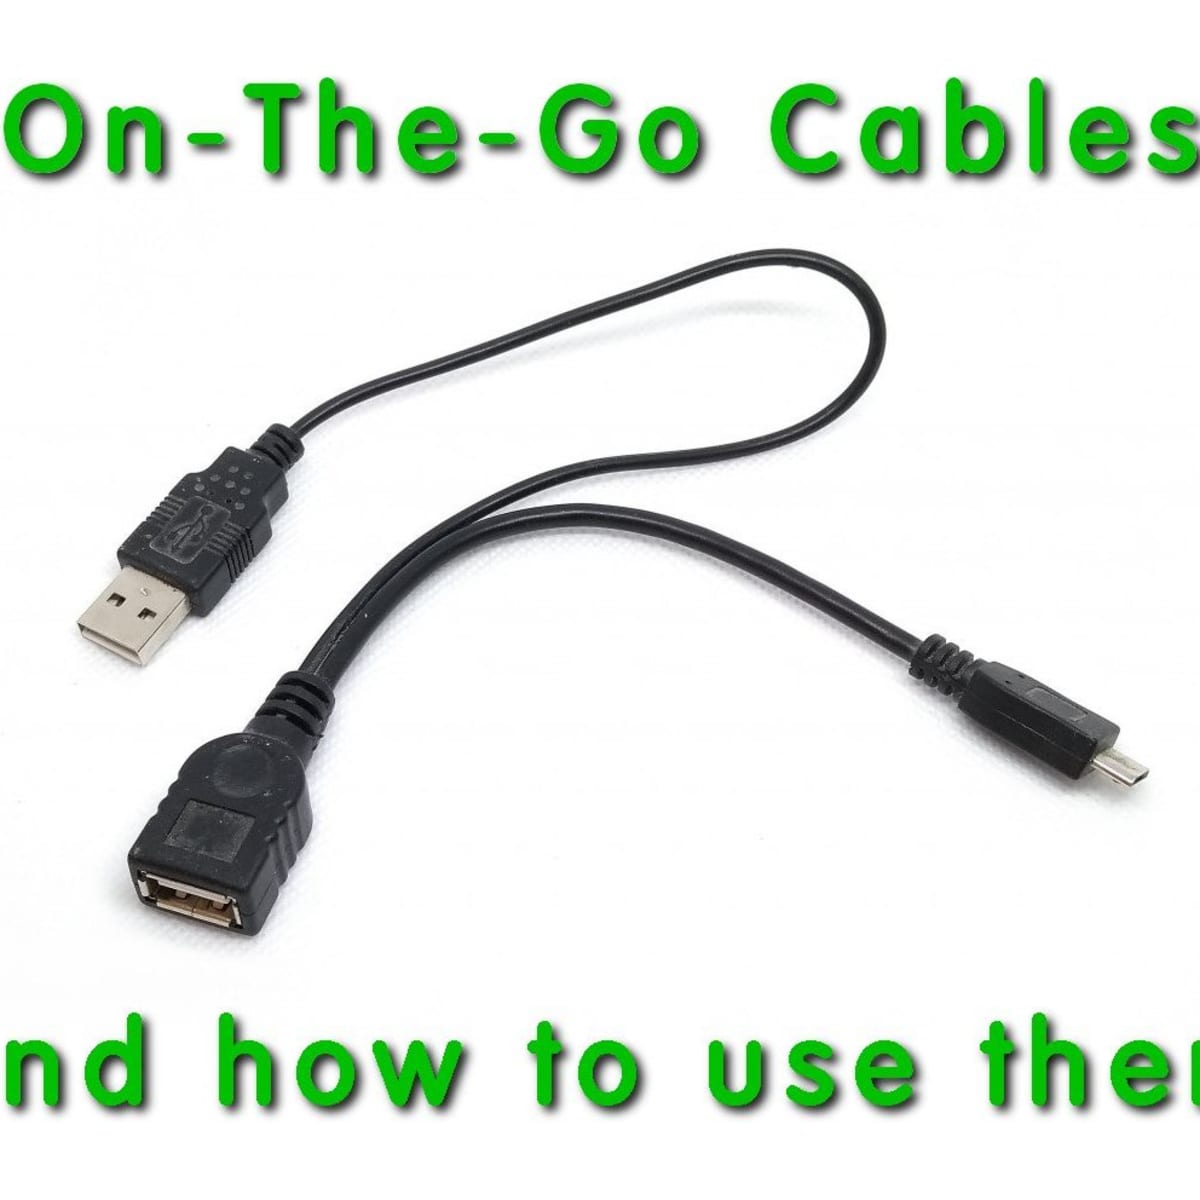 Konkurrere Afslag Reparation mulig How to Use USB Devices With Smartphones & Tablets: On-The-Go Cables -  TurboFuture